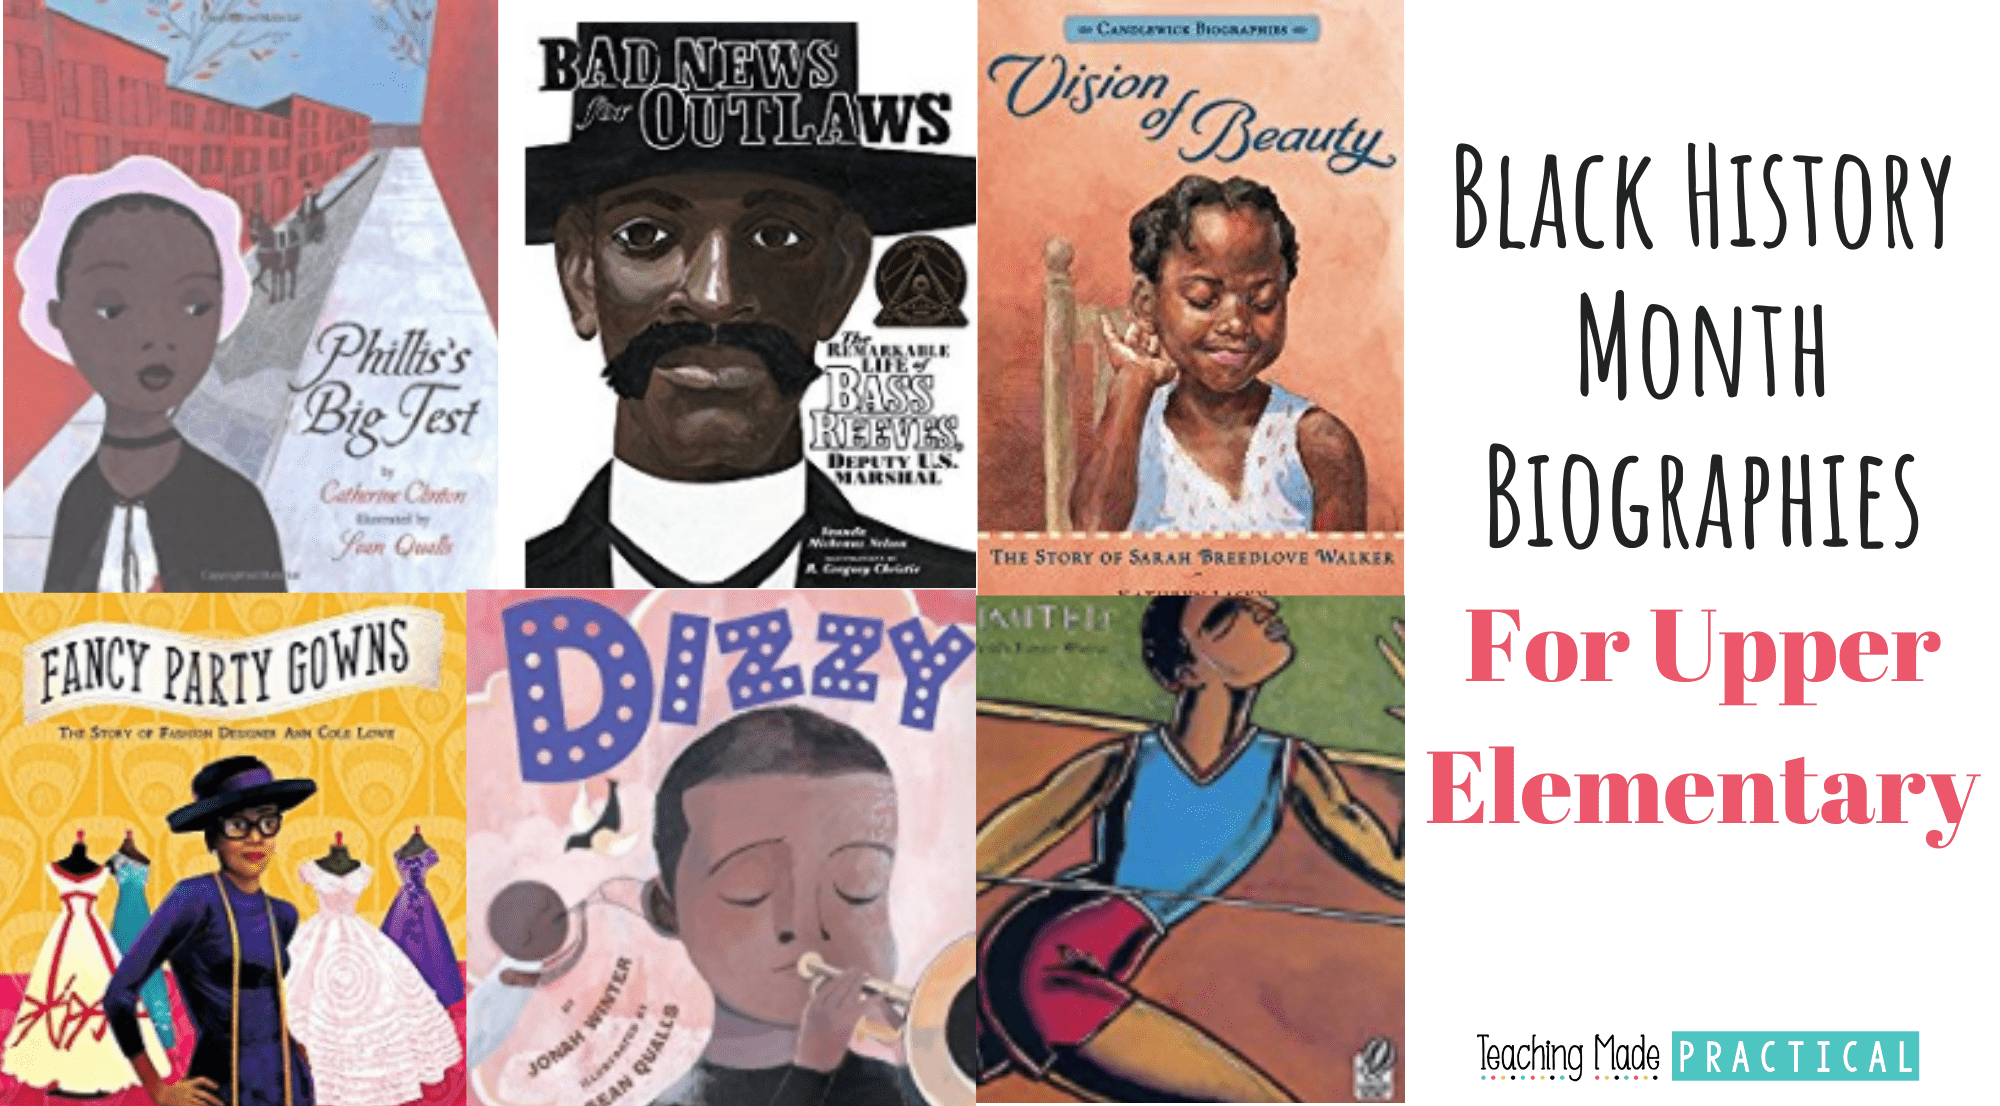 black history month biographies to teach upper elementary students about inspiring African Americans